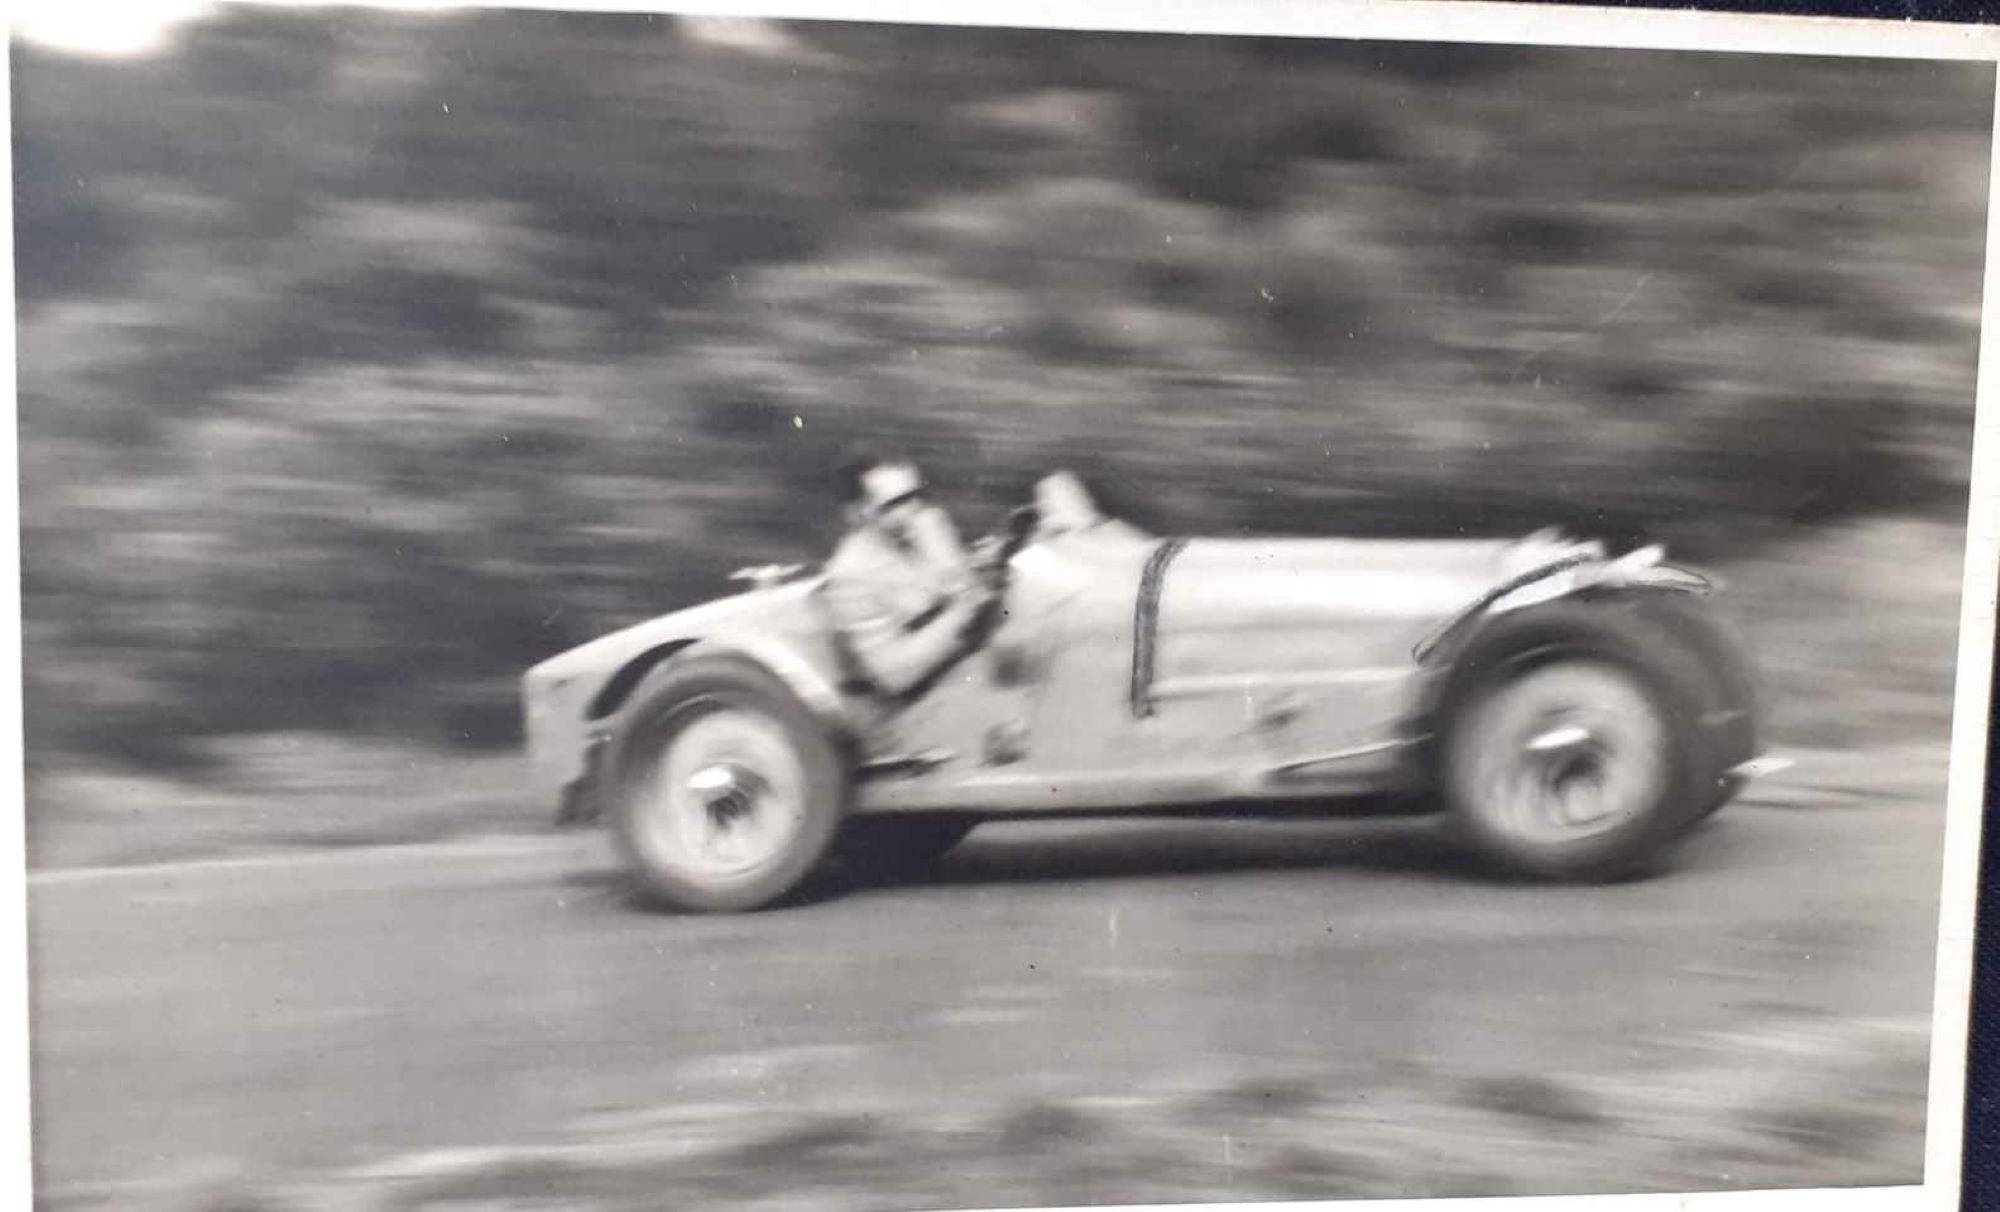 Name:  NSCC 1950 #0116 Bugatti T35 at speed - light colour 1950's - image Graeme Wells arch Anthony Wel.jpg
Views: 191
Size:  158.1 KB